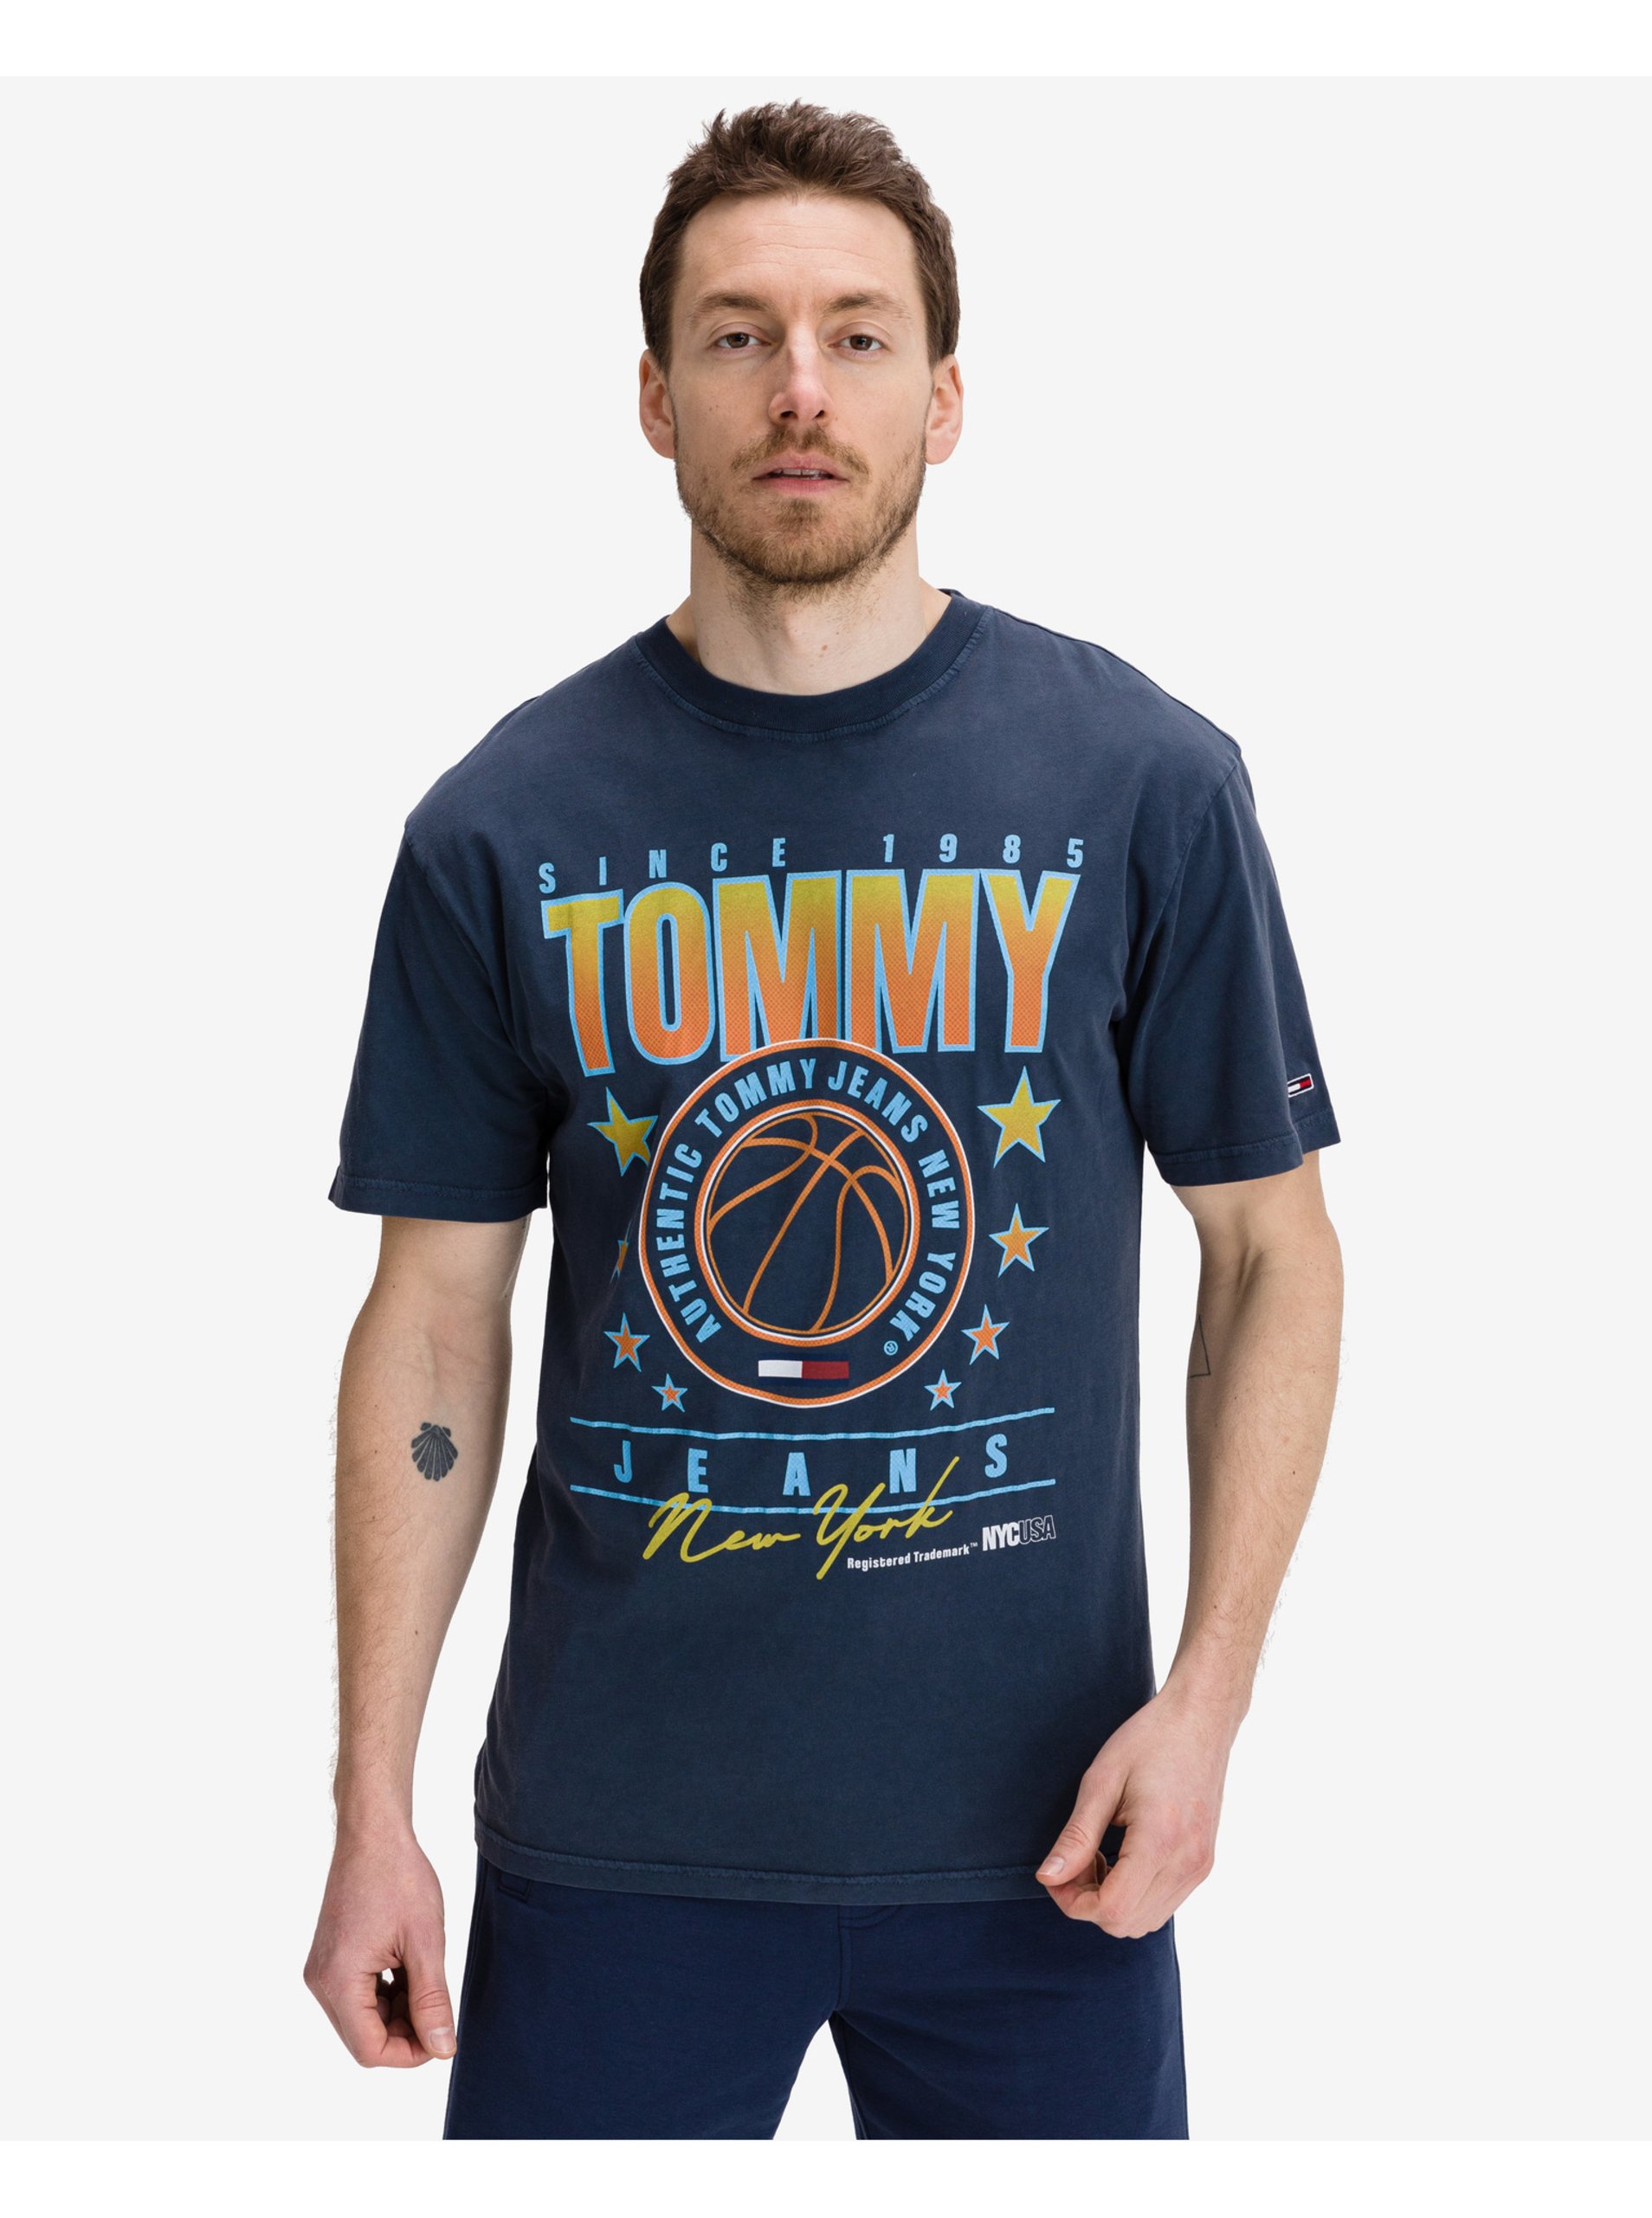 Basketball Graphic T-Shirt Tommy Jeans - Men